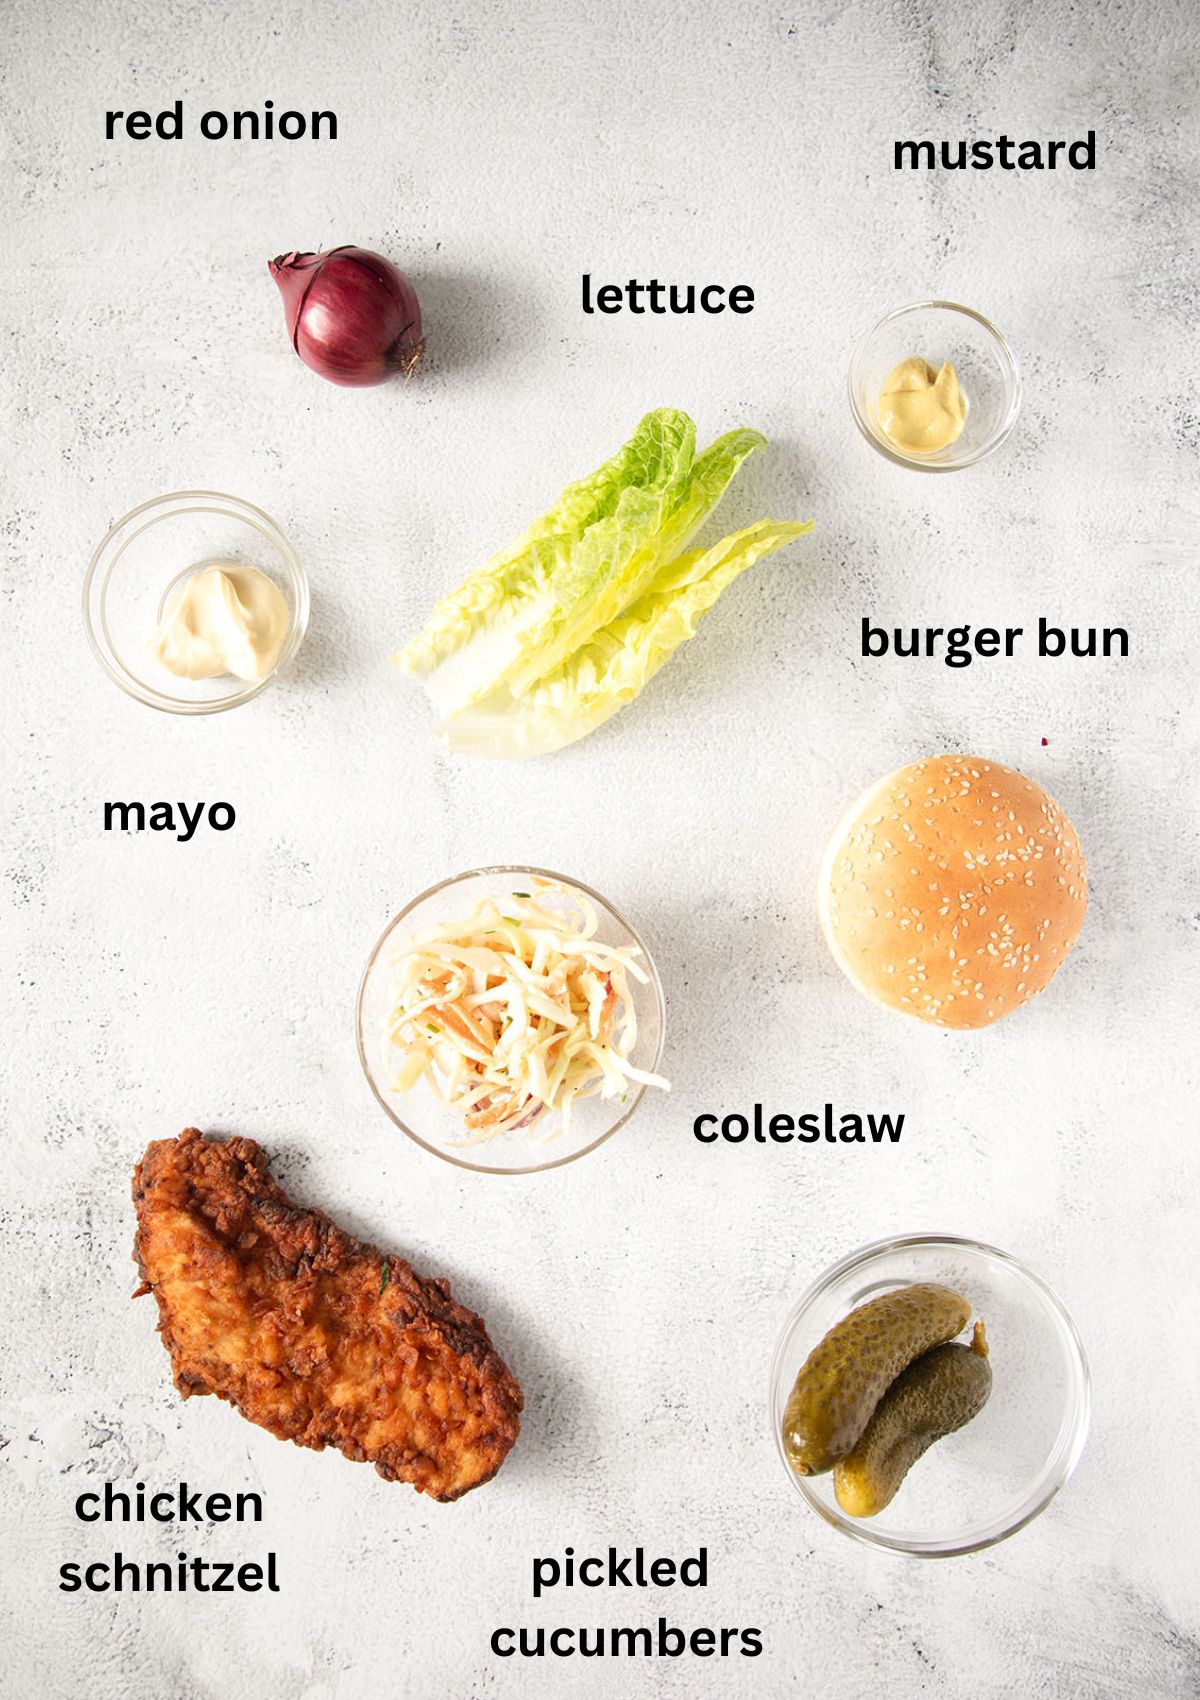 listed ingredients for making burger with chicken schnitzel, lettuce and coleslaw.